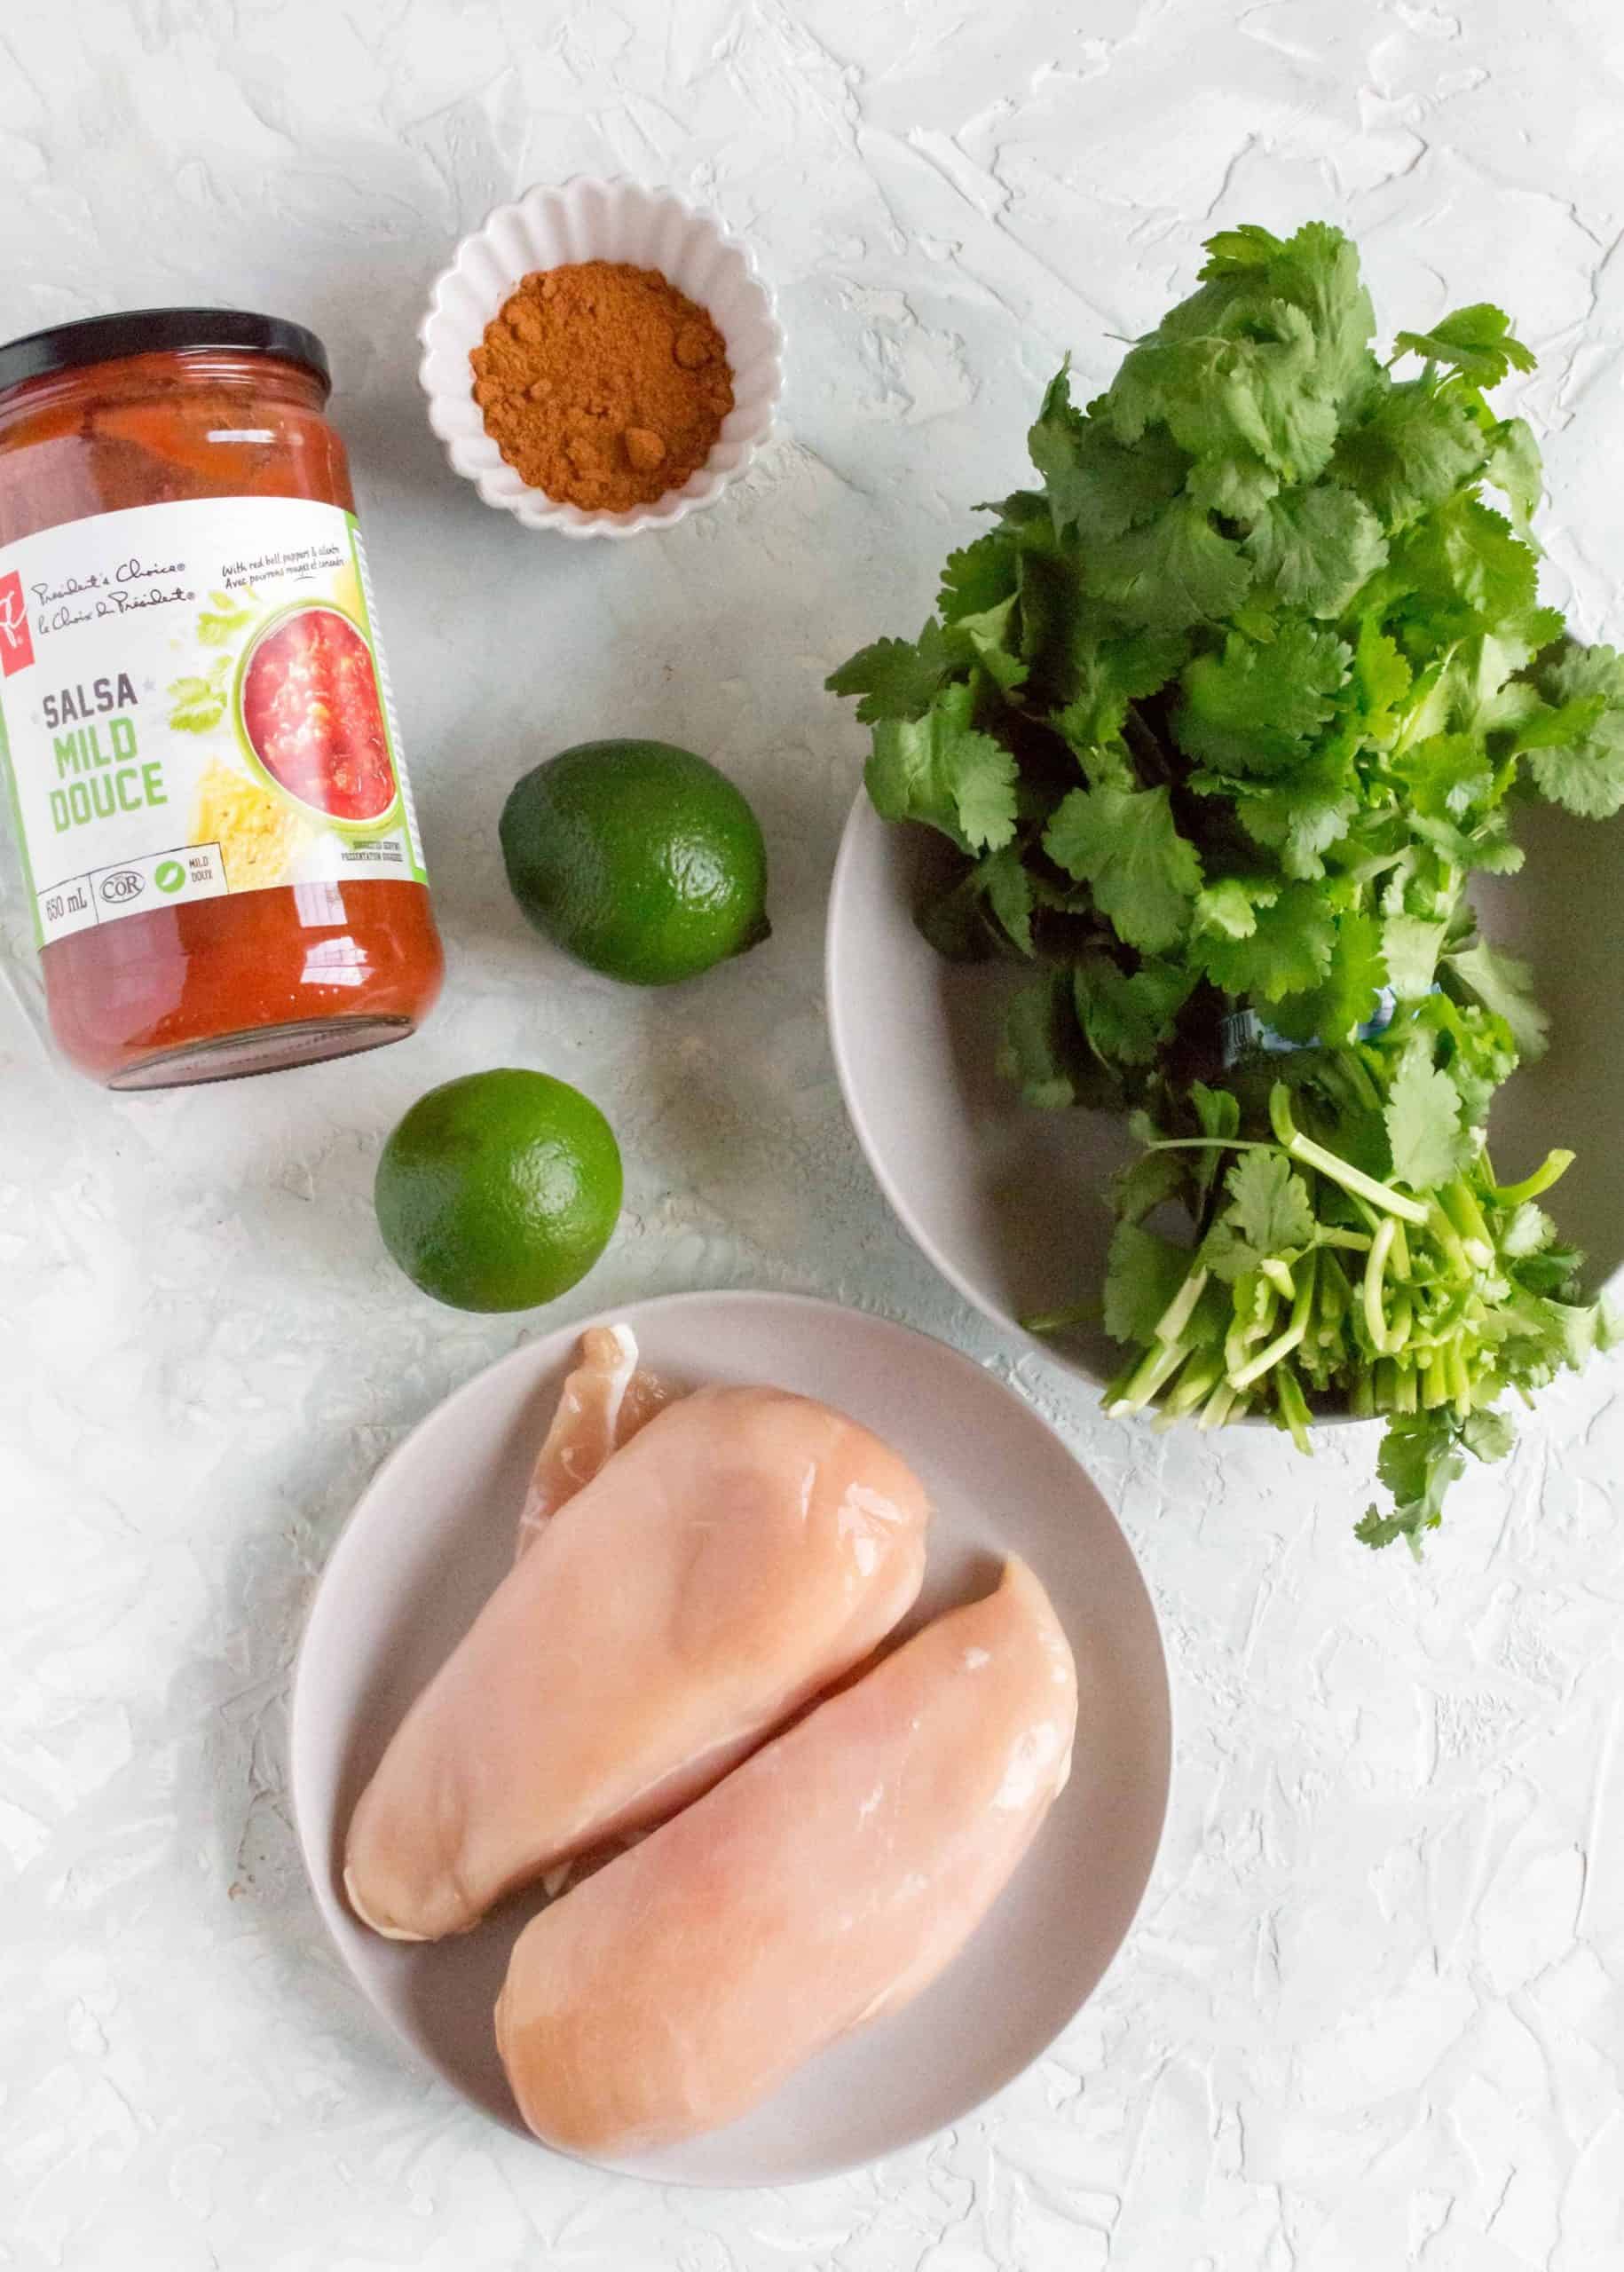 ingredients for slow cooker shredded chicken flatly: chicken, salsa, lime, taco seasoning, cilantro